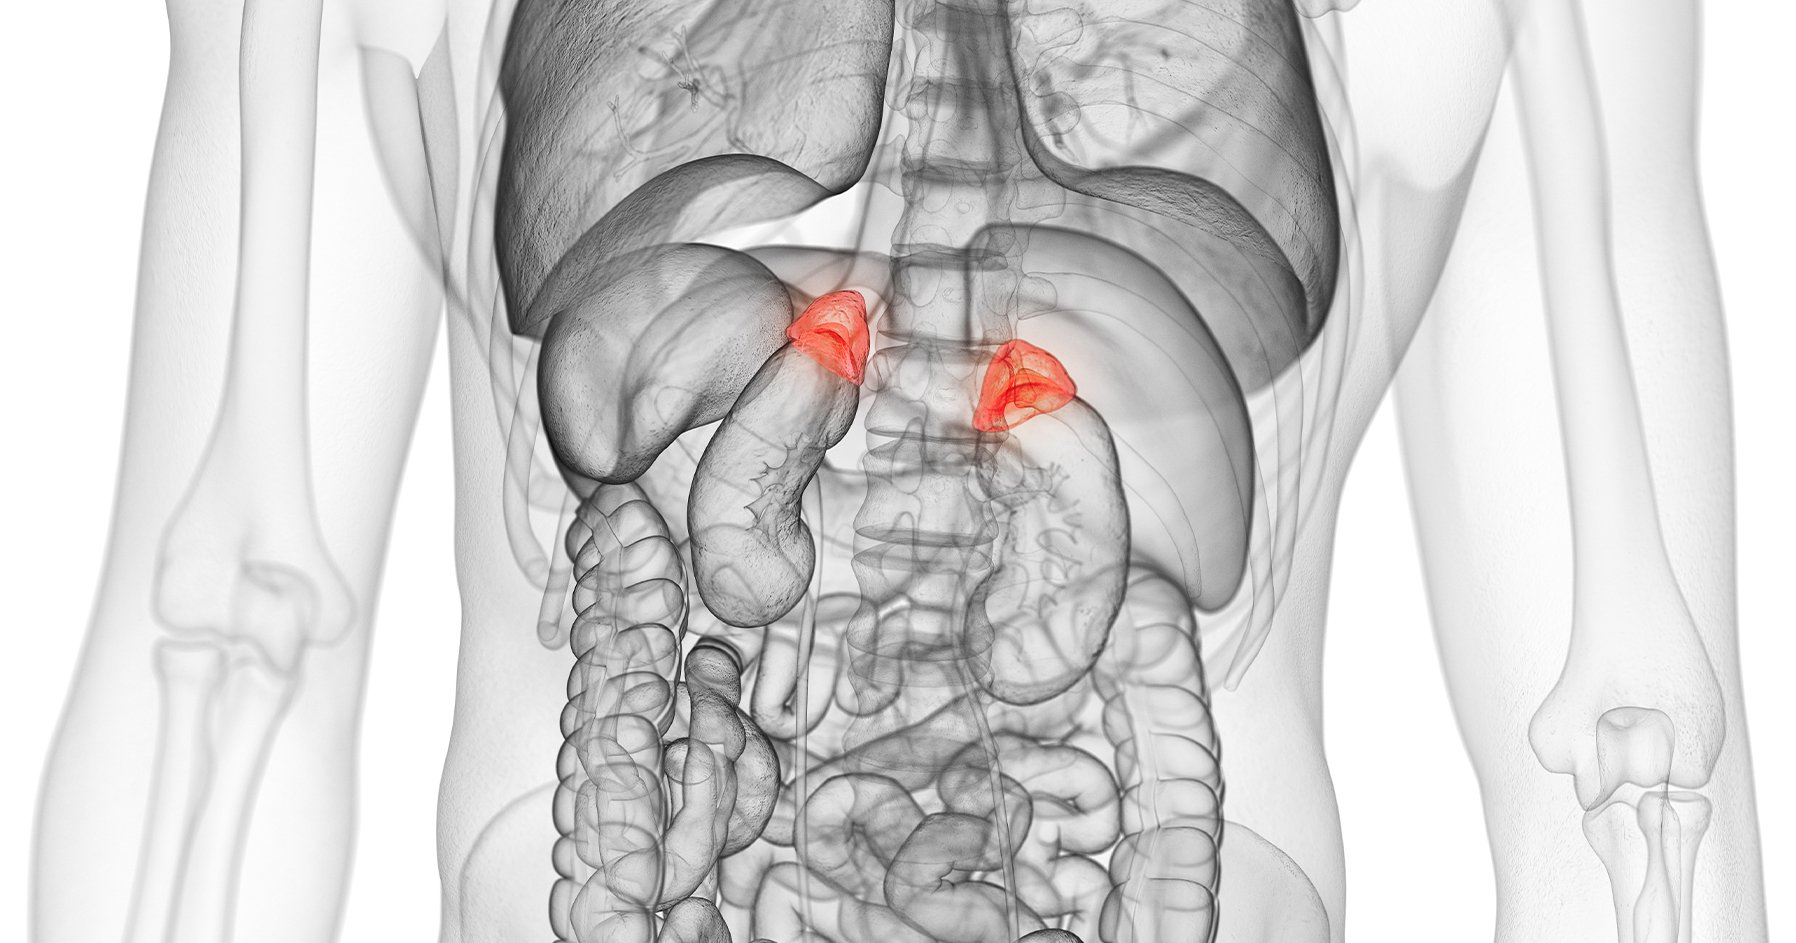 Image of adrenal glands in body.